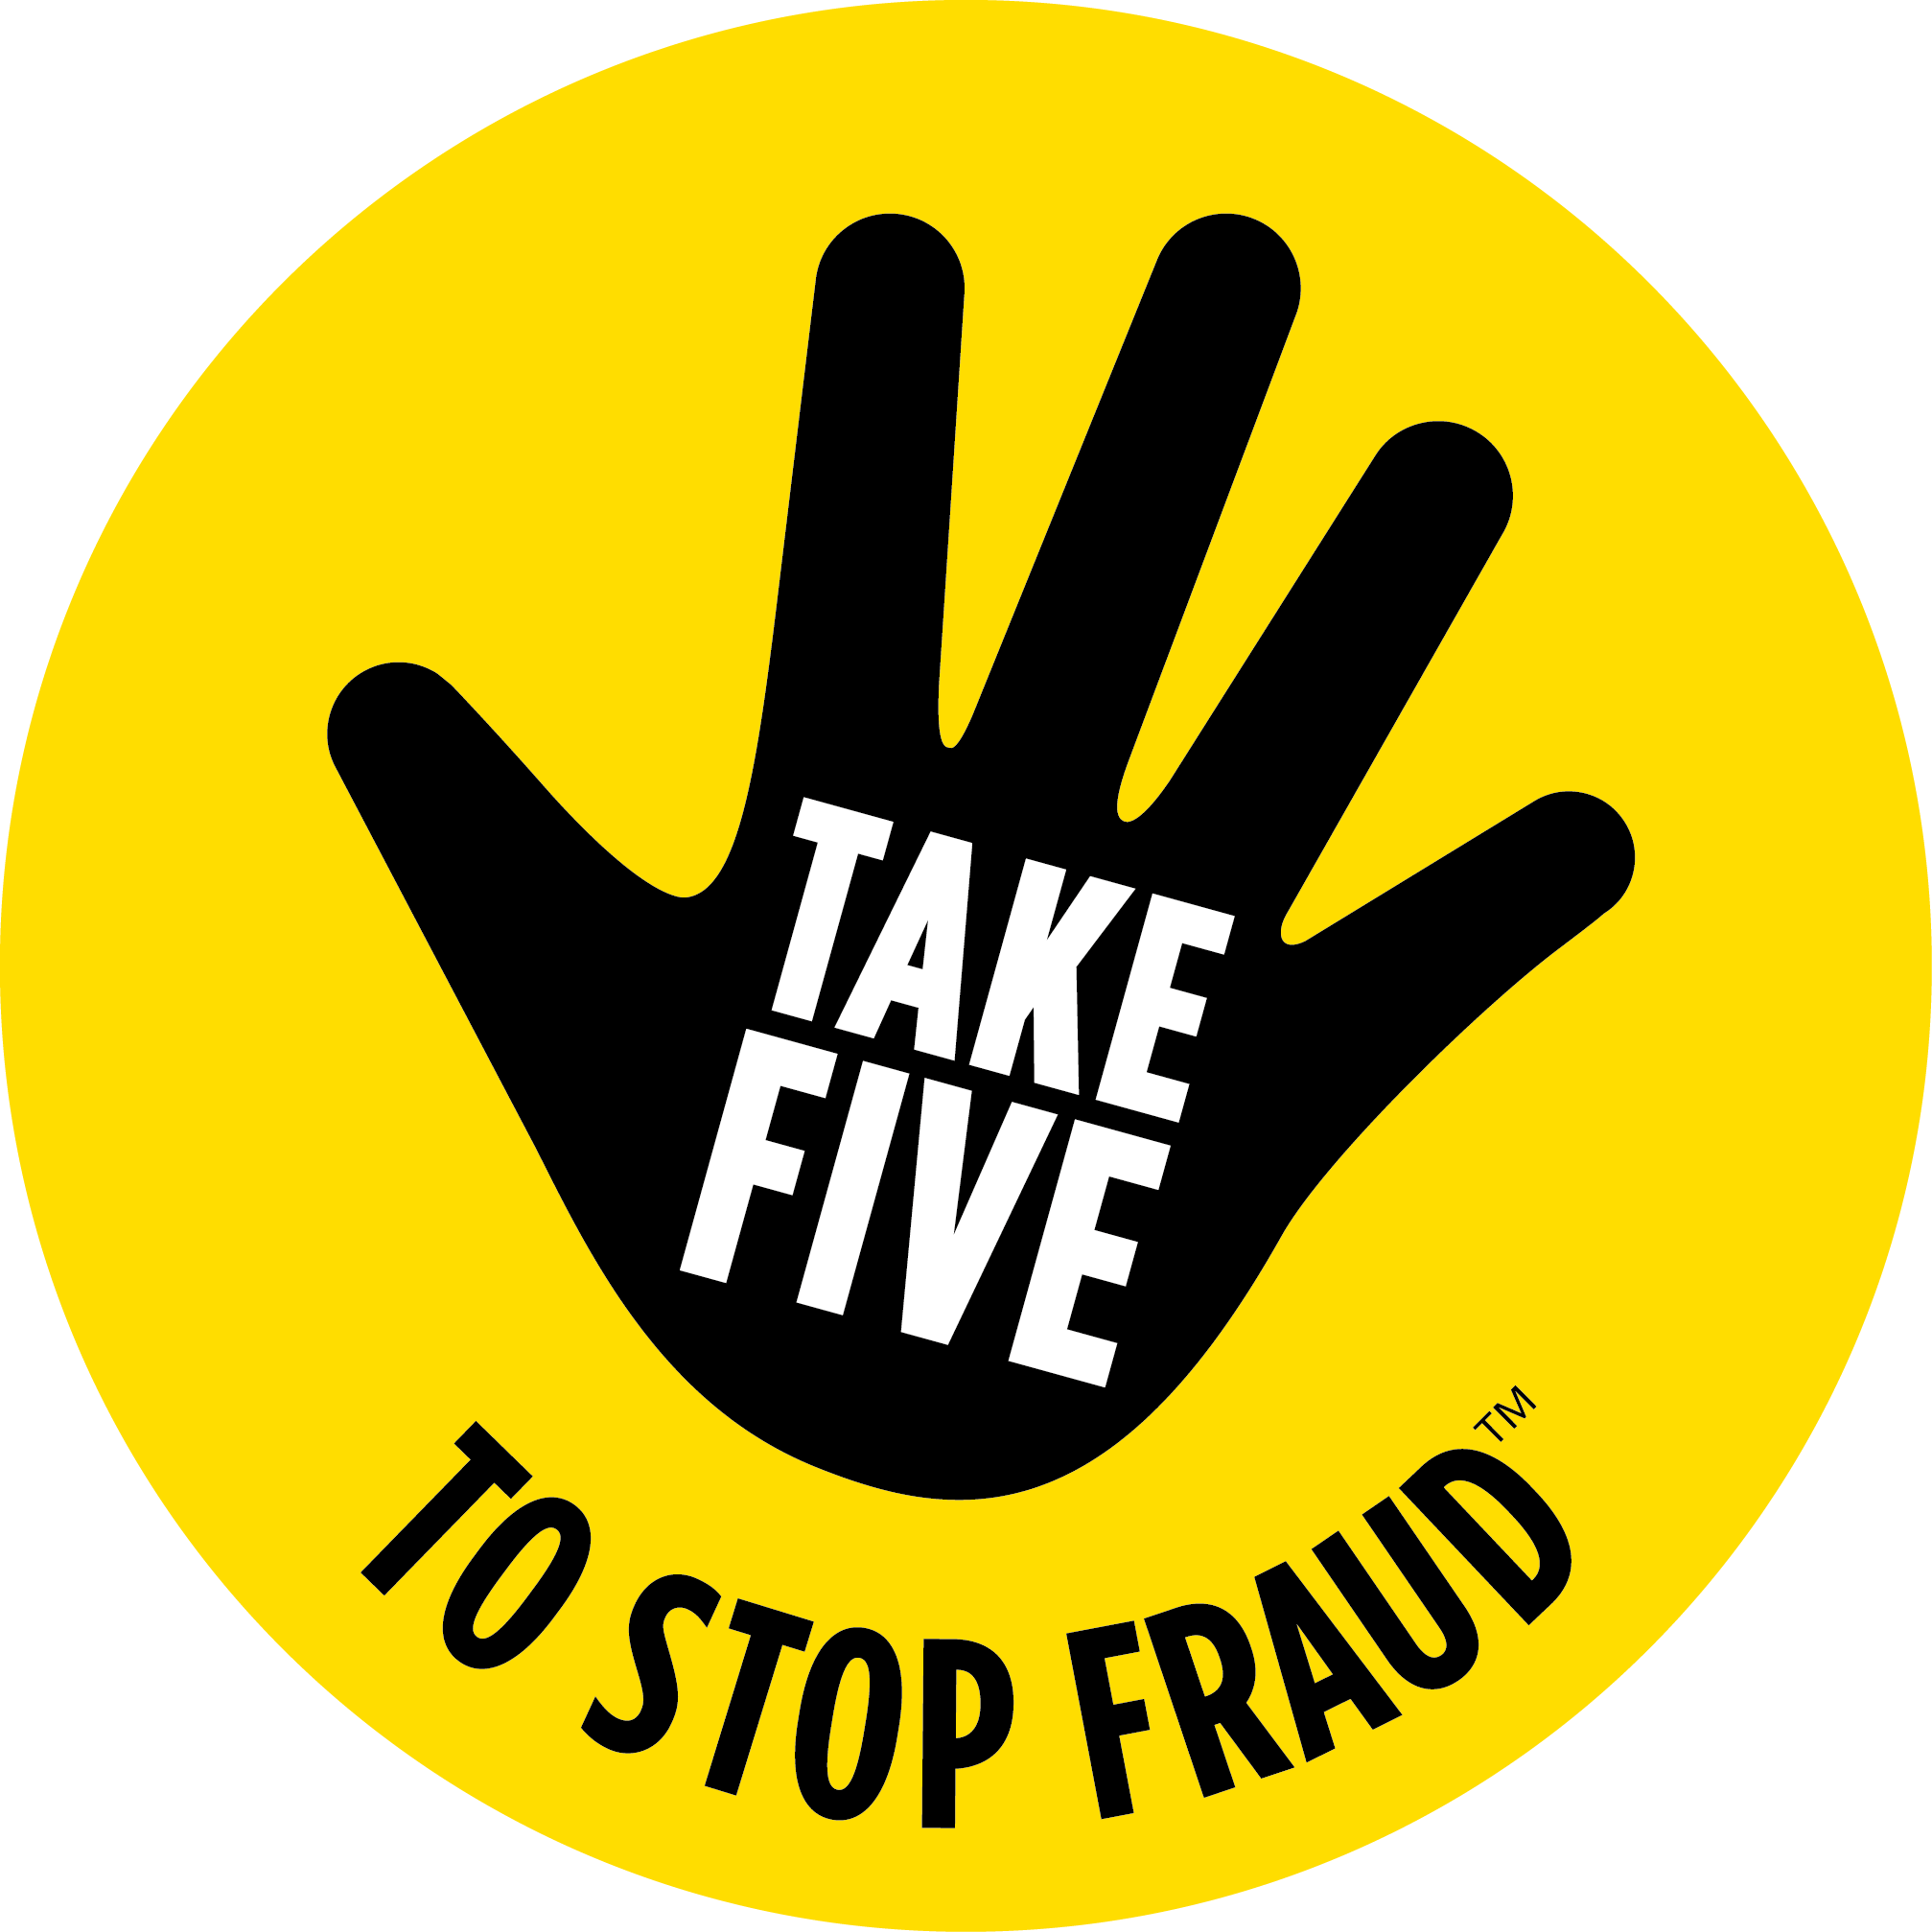 Visits the 'Take 5 to stop fraud' website